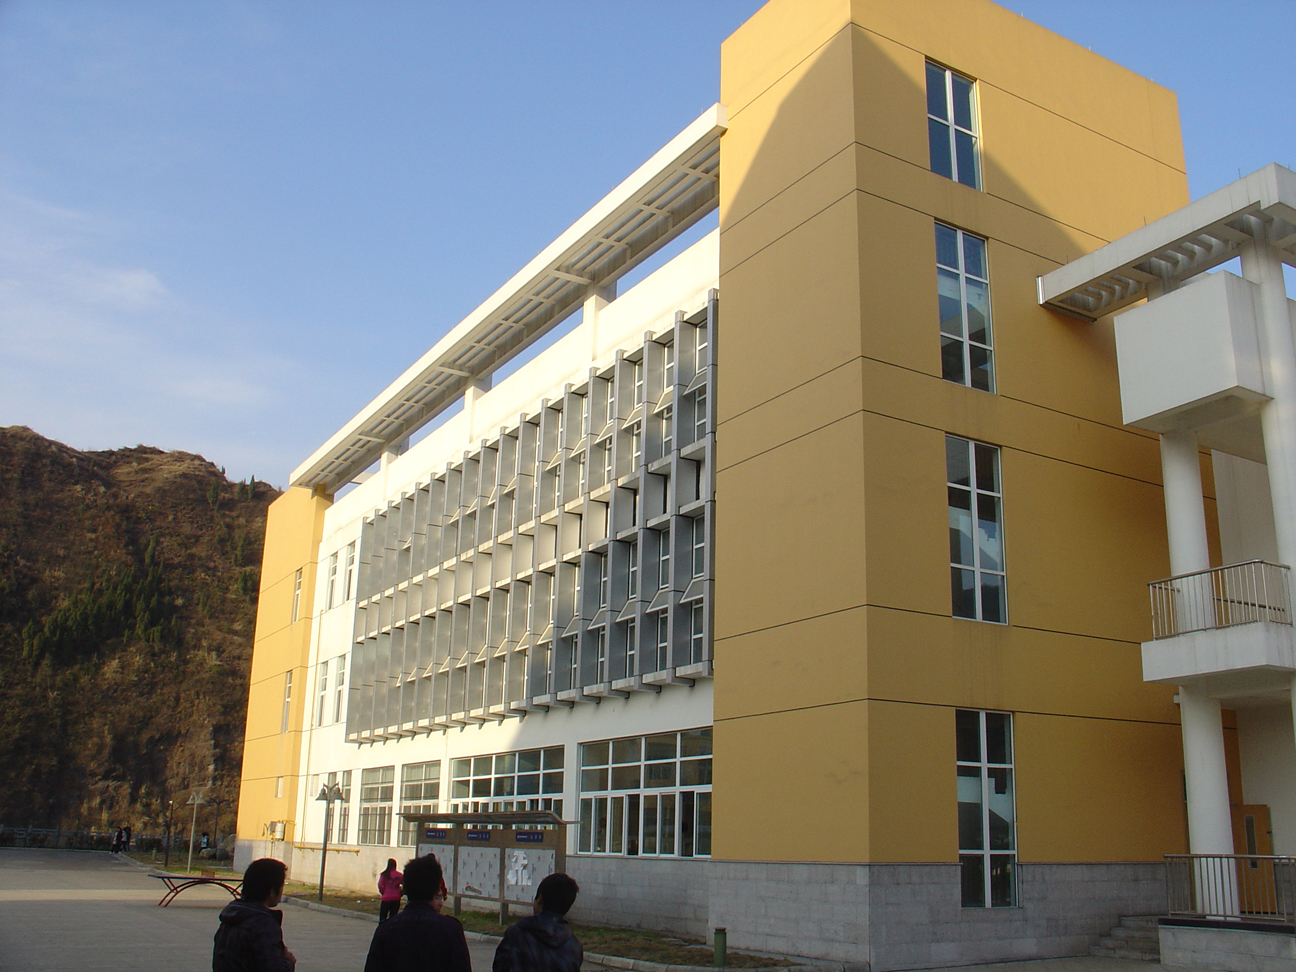 The students&rsquo; accomodation